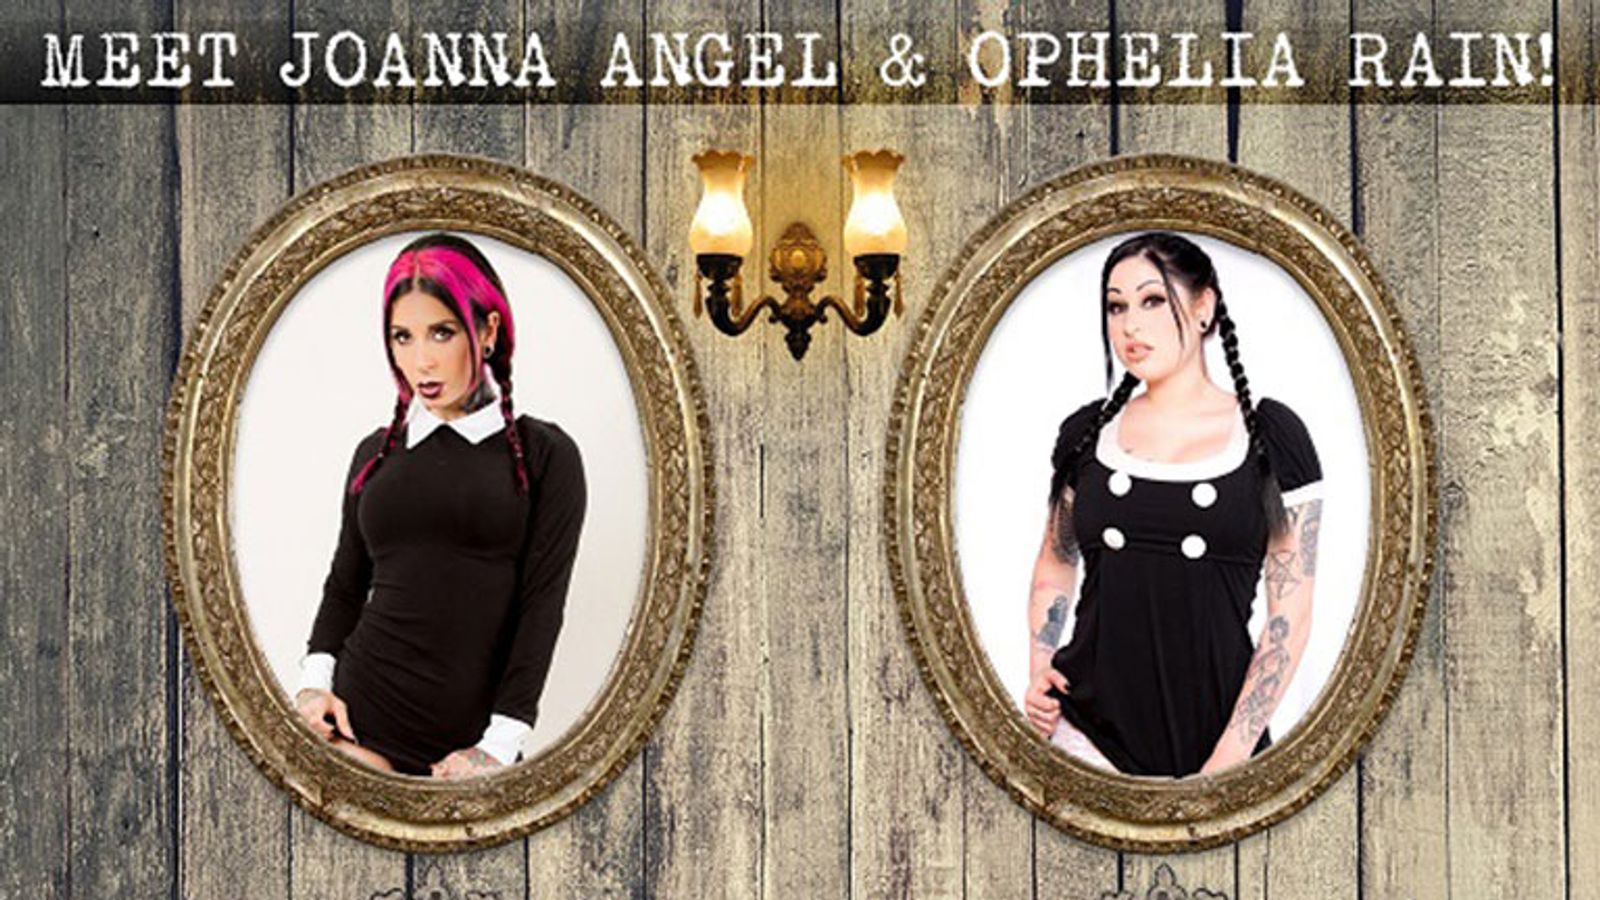 Joanna Angel, Ophelia Rain to Appear at Almost Legal Fall Festival in NY